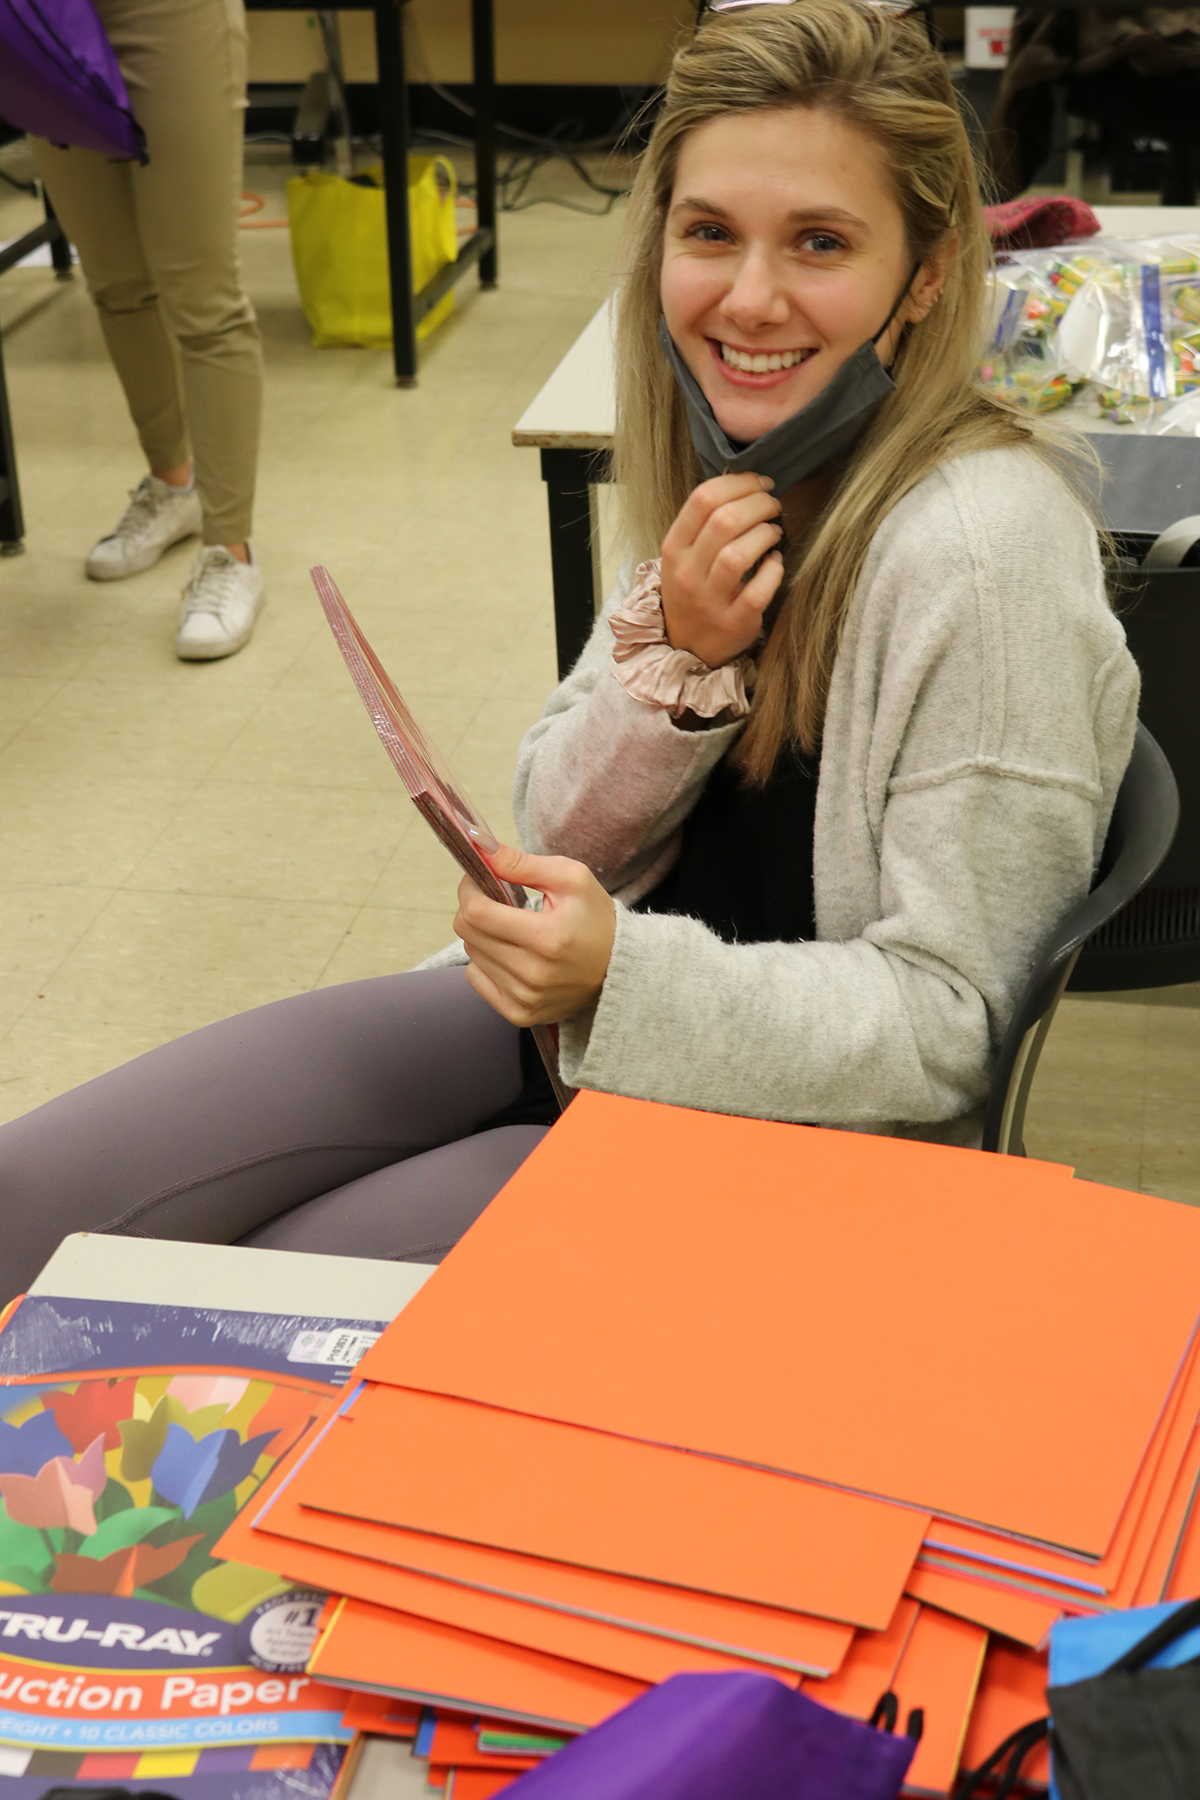 A student poses beside orange paper included in the art kits.